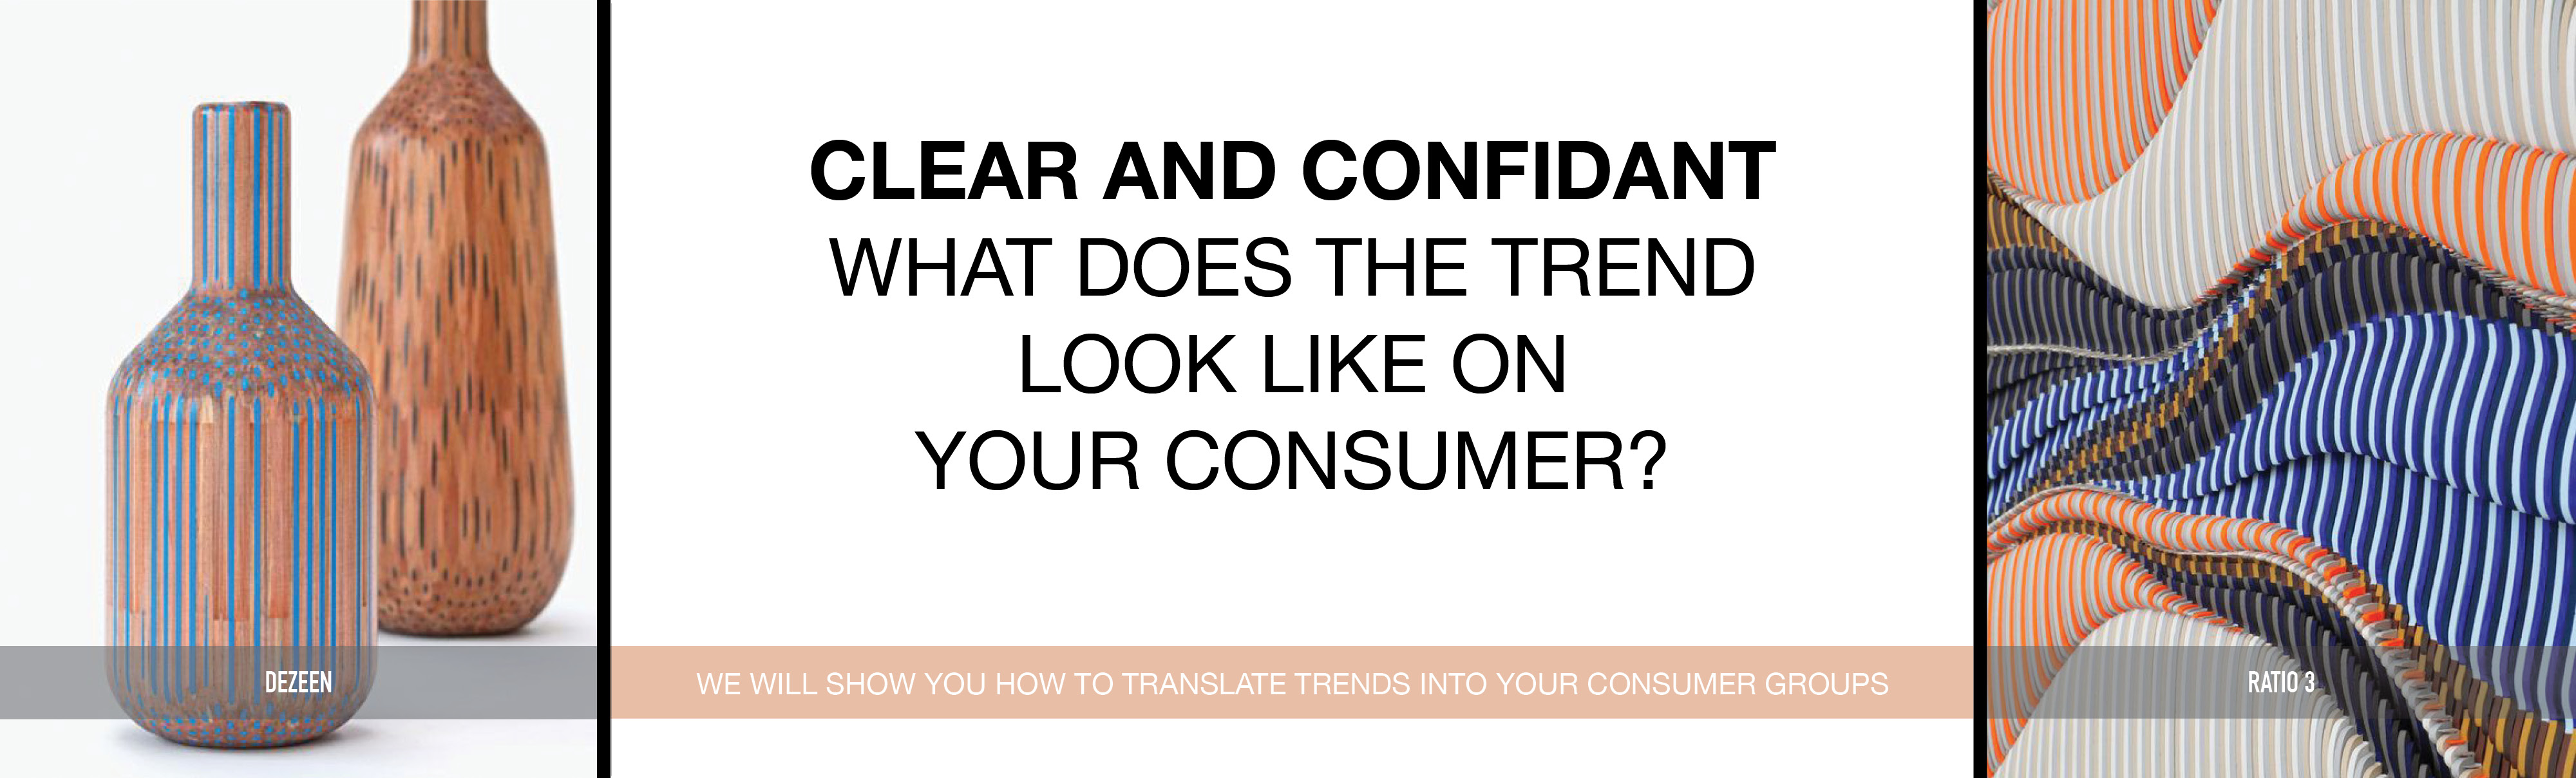 Clear and confident - What does the trend look like on your consumer?